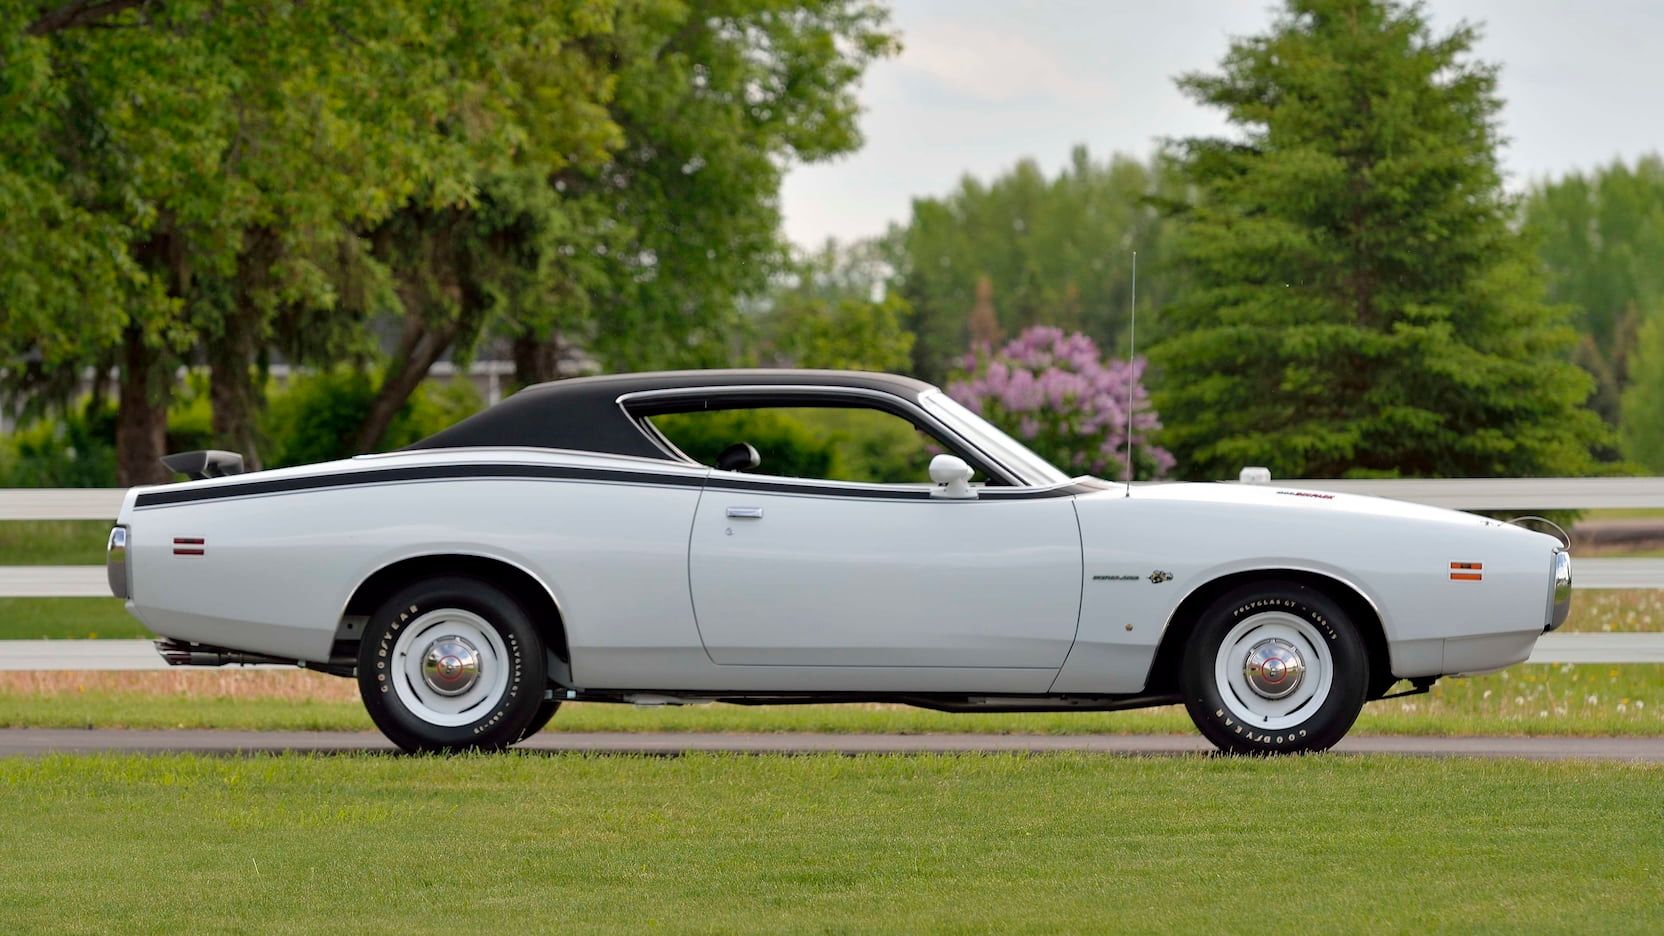 Side view of a Bright White 1971 Dodge Charger Super Bee on a driveway